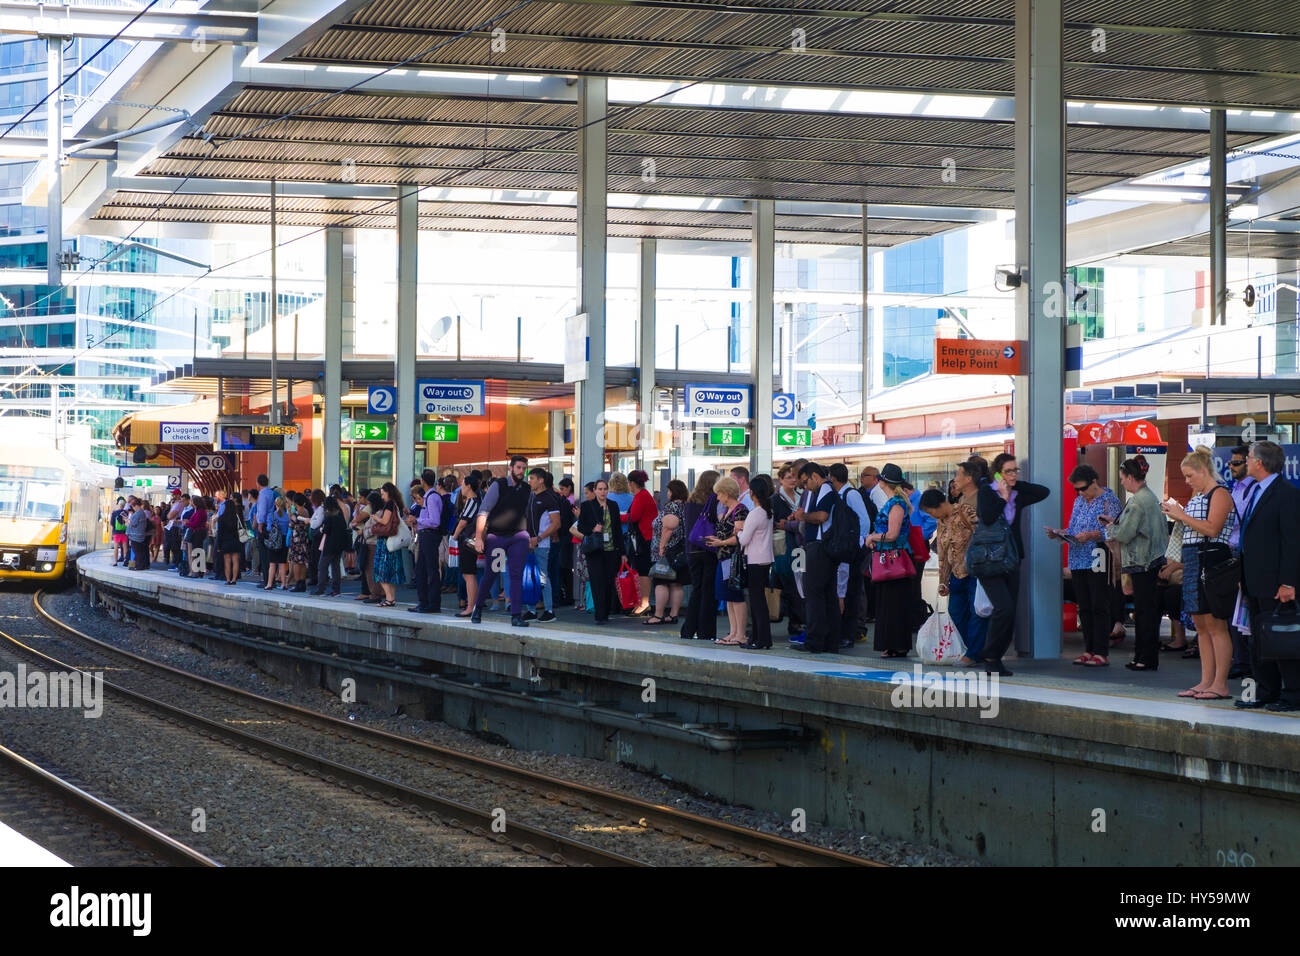 Rail commuters waiting: crowded platform at Parramatta Station, Sydney, Australia. Peak hour crowds. Going home from work.Commuting. Many commuters Stock Photo